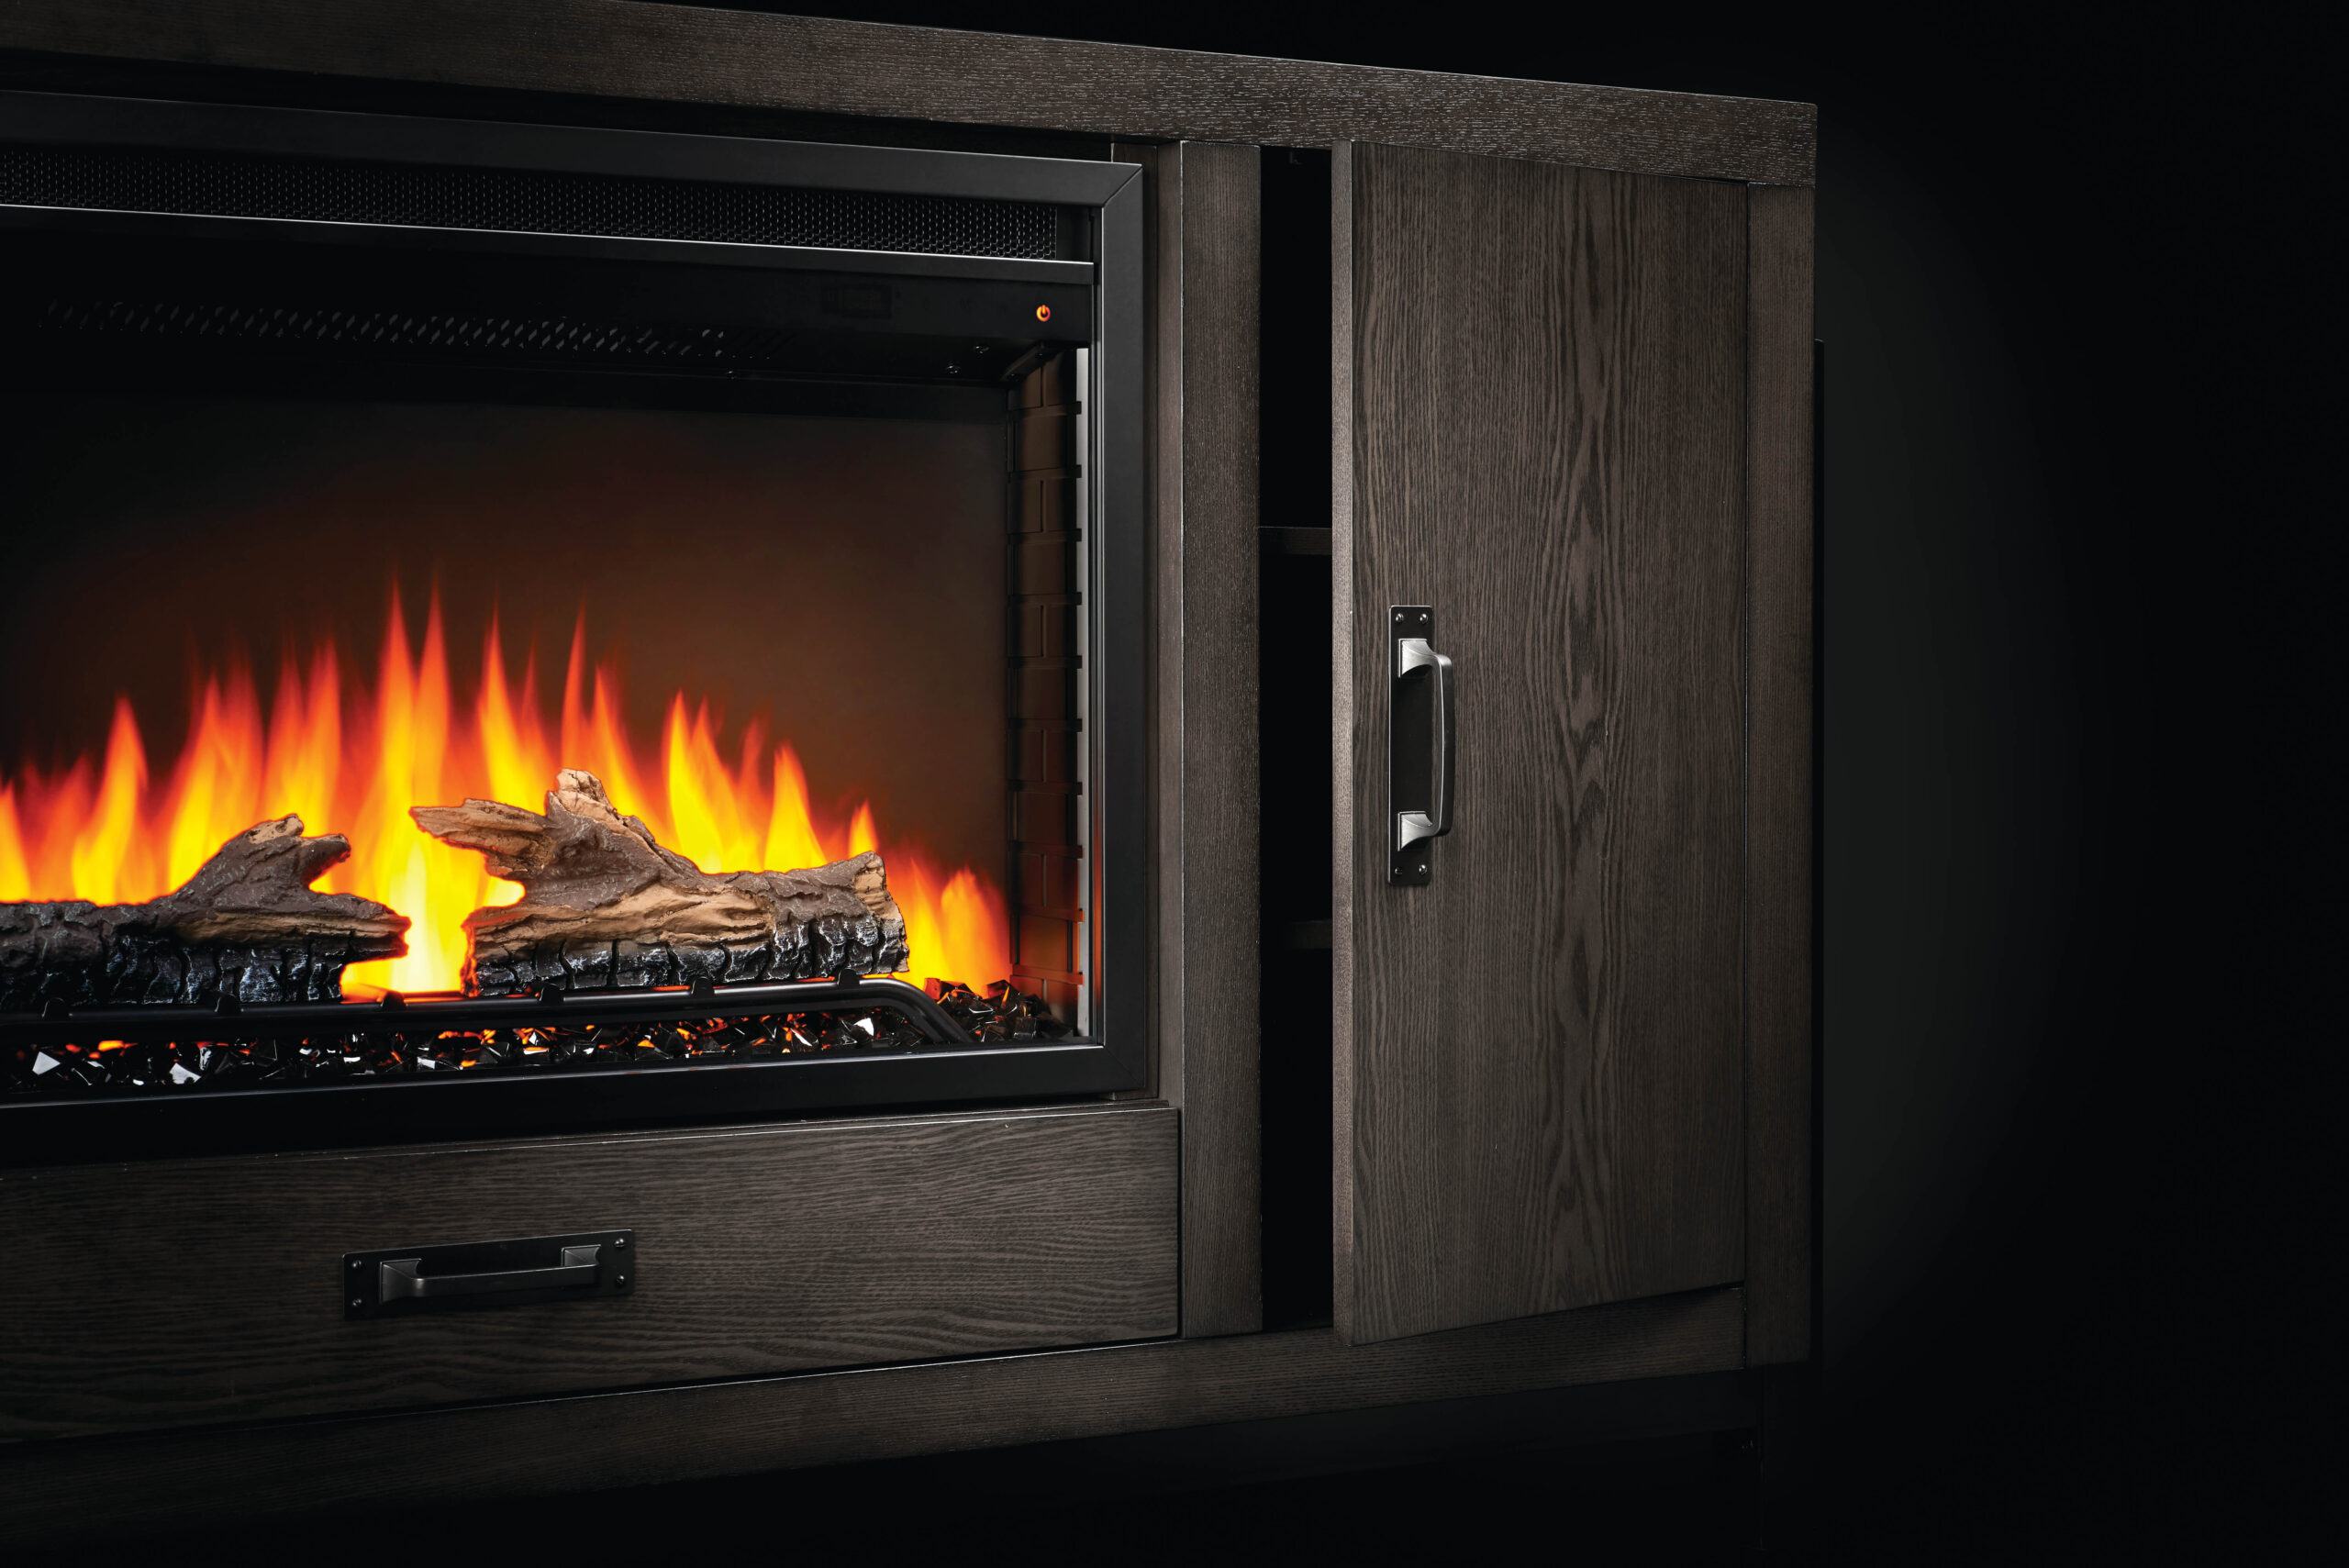 Napoleon Franklin media cabinet with 30-inch Cineview fireplace